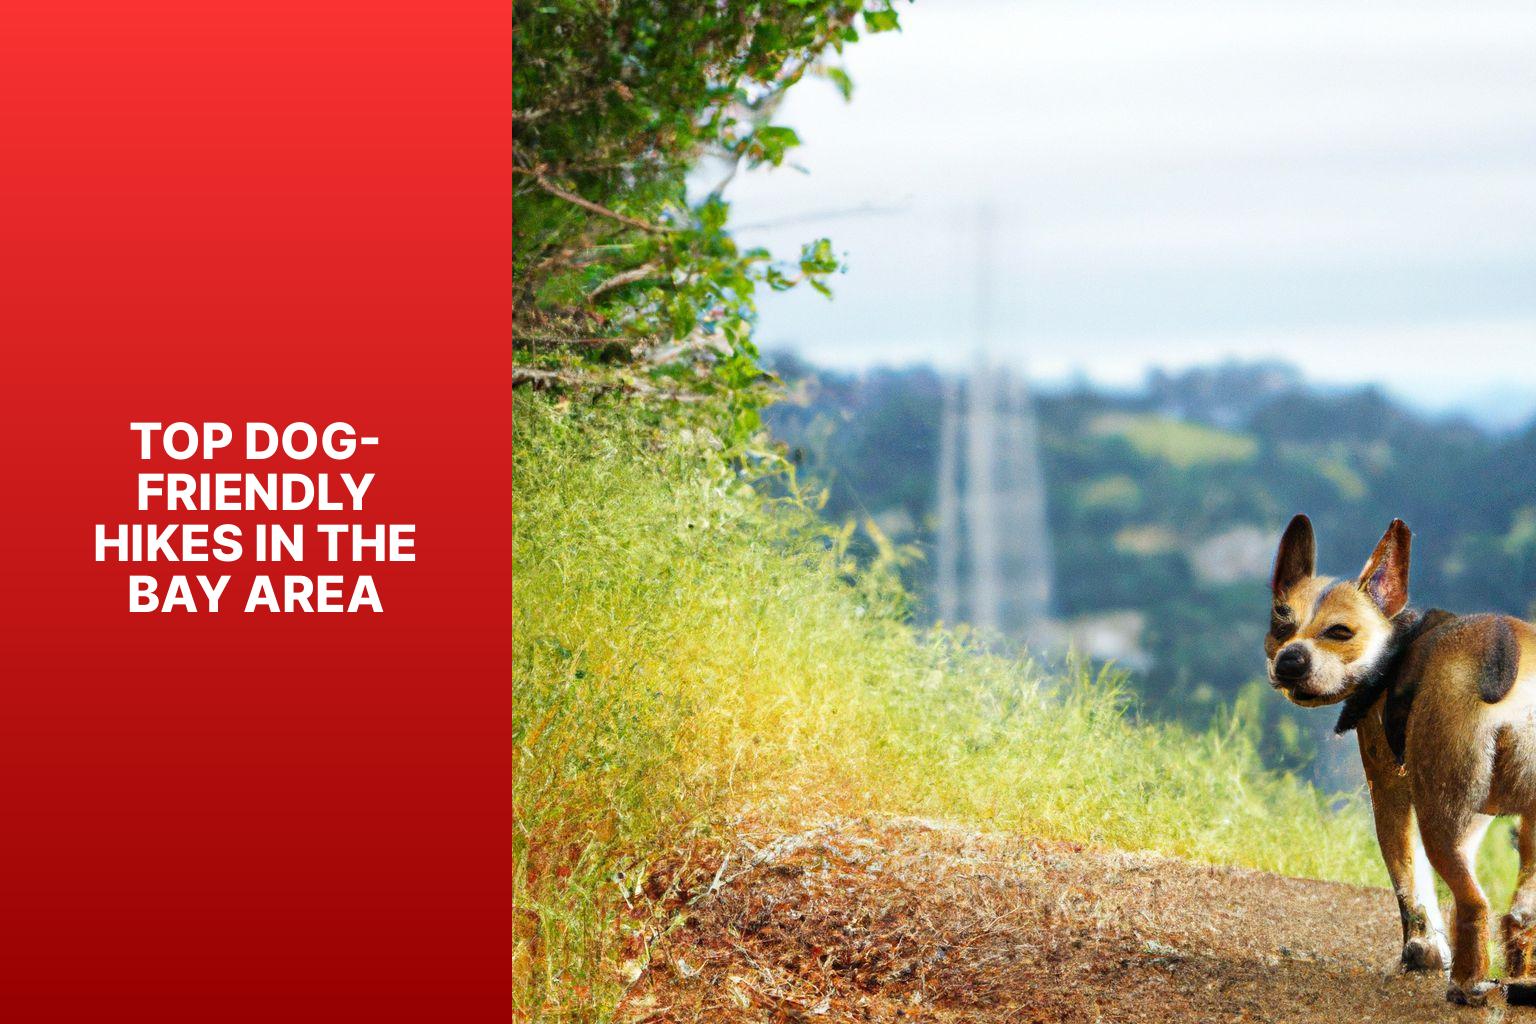 Top Dog-Friendly Hikes in the Bay Area - Dog Friendly Hikes in Bay Area 